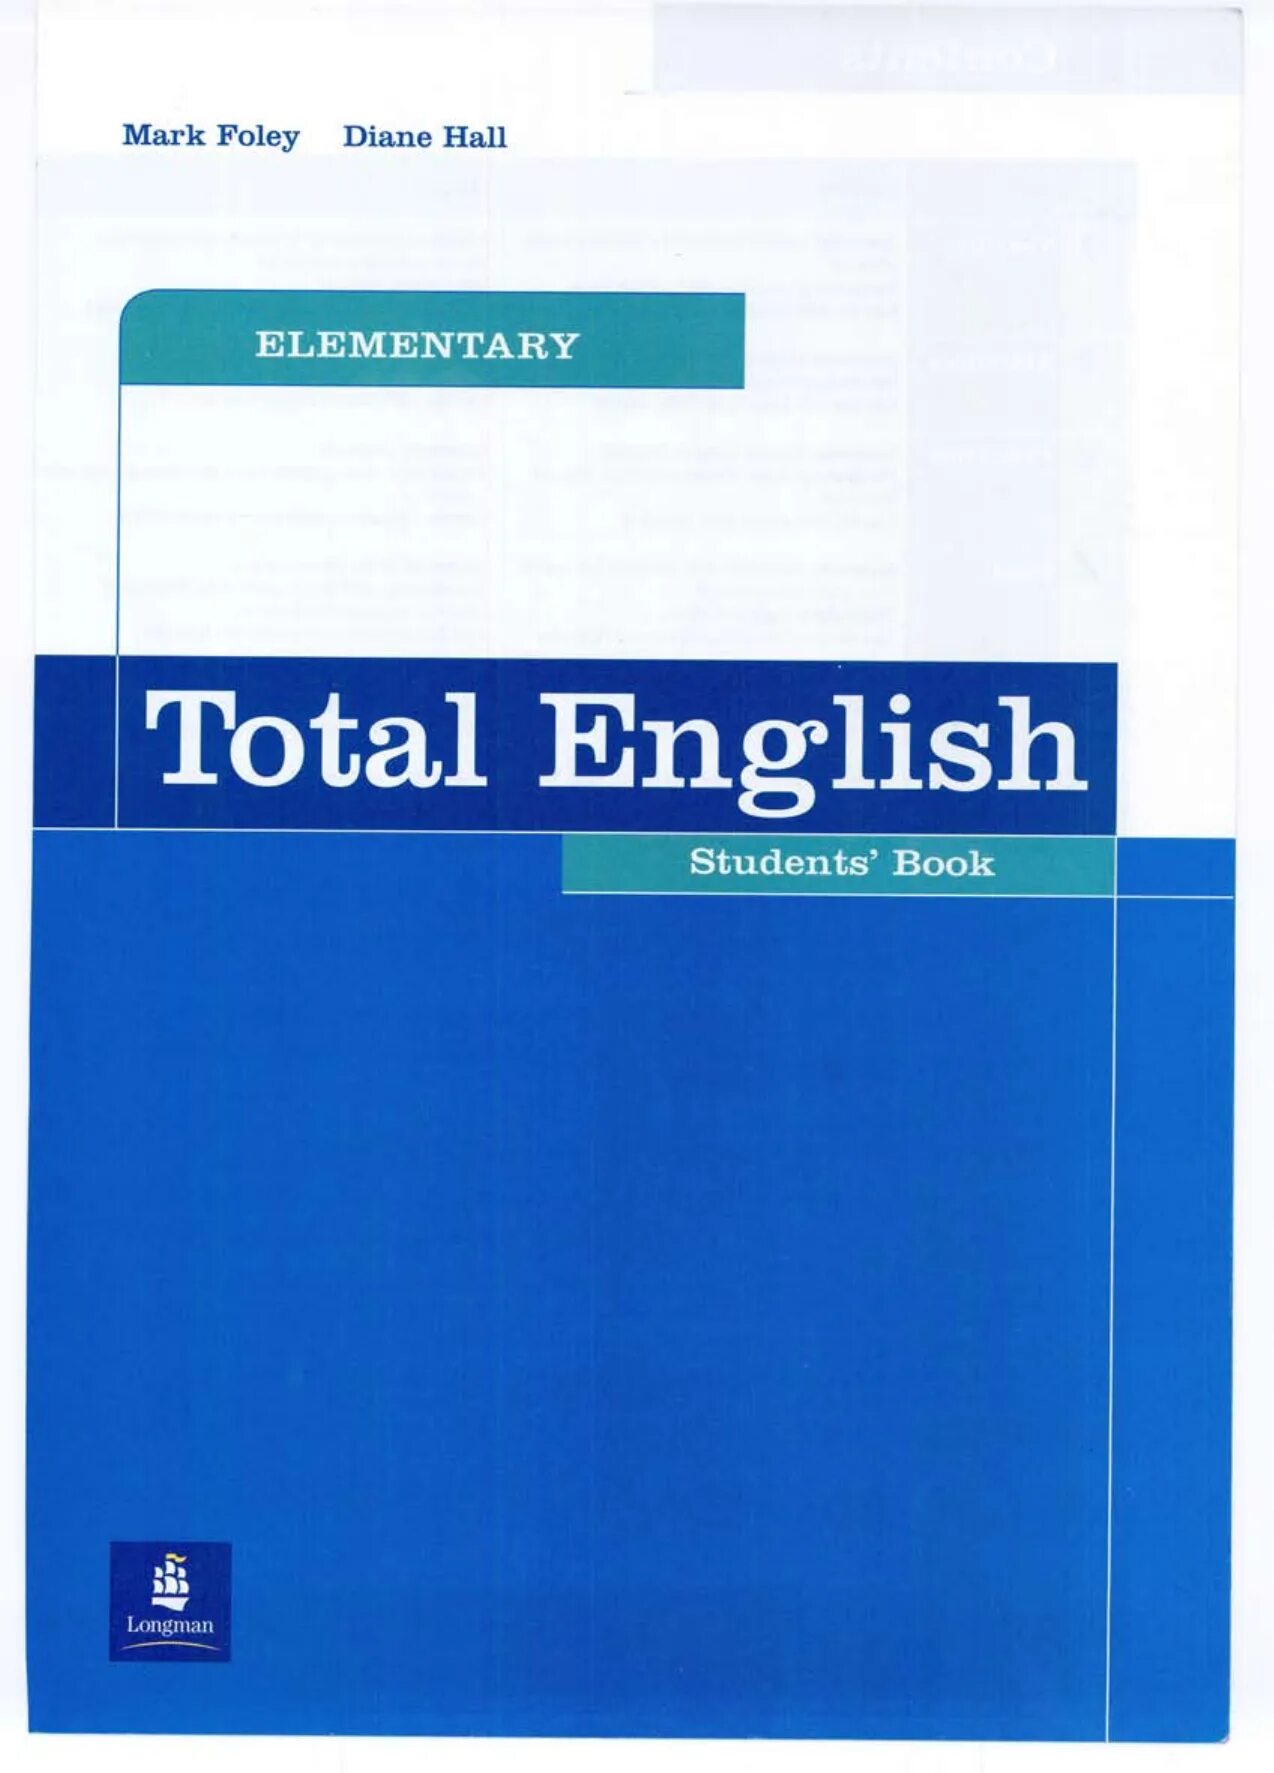 Total English Elementary. New total English, Longman. New total English Elementary. Total English Intermediate student's book. New total english students book